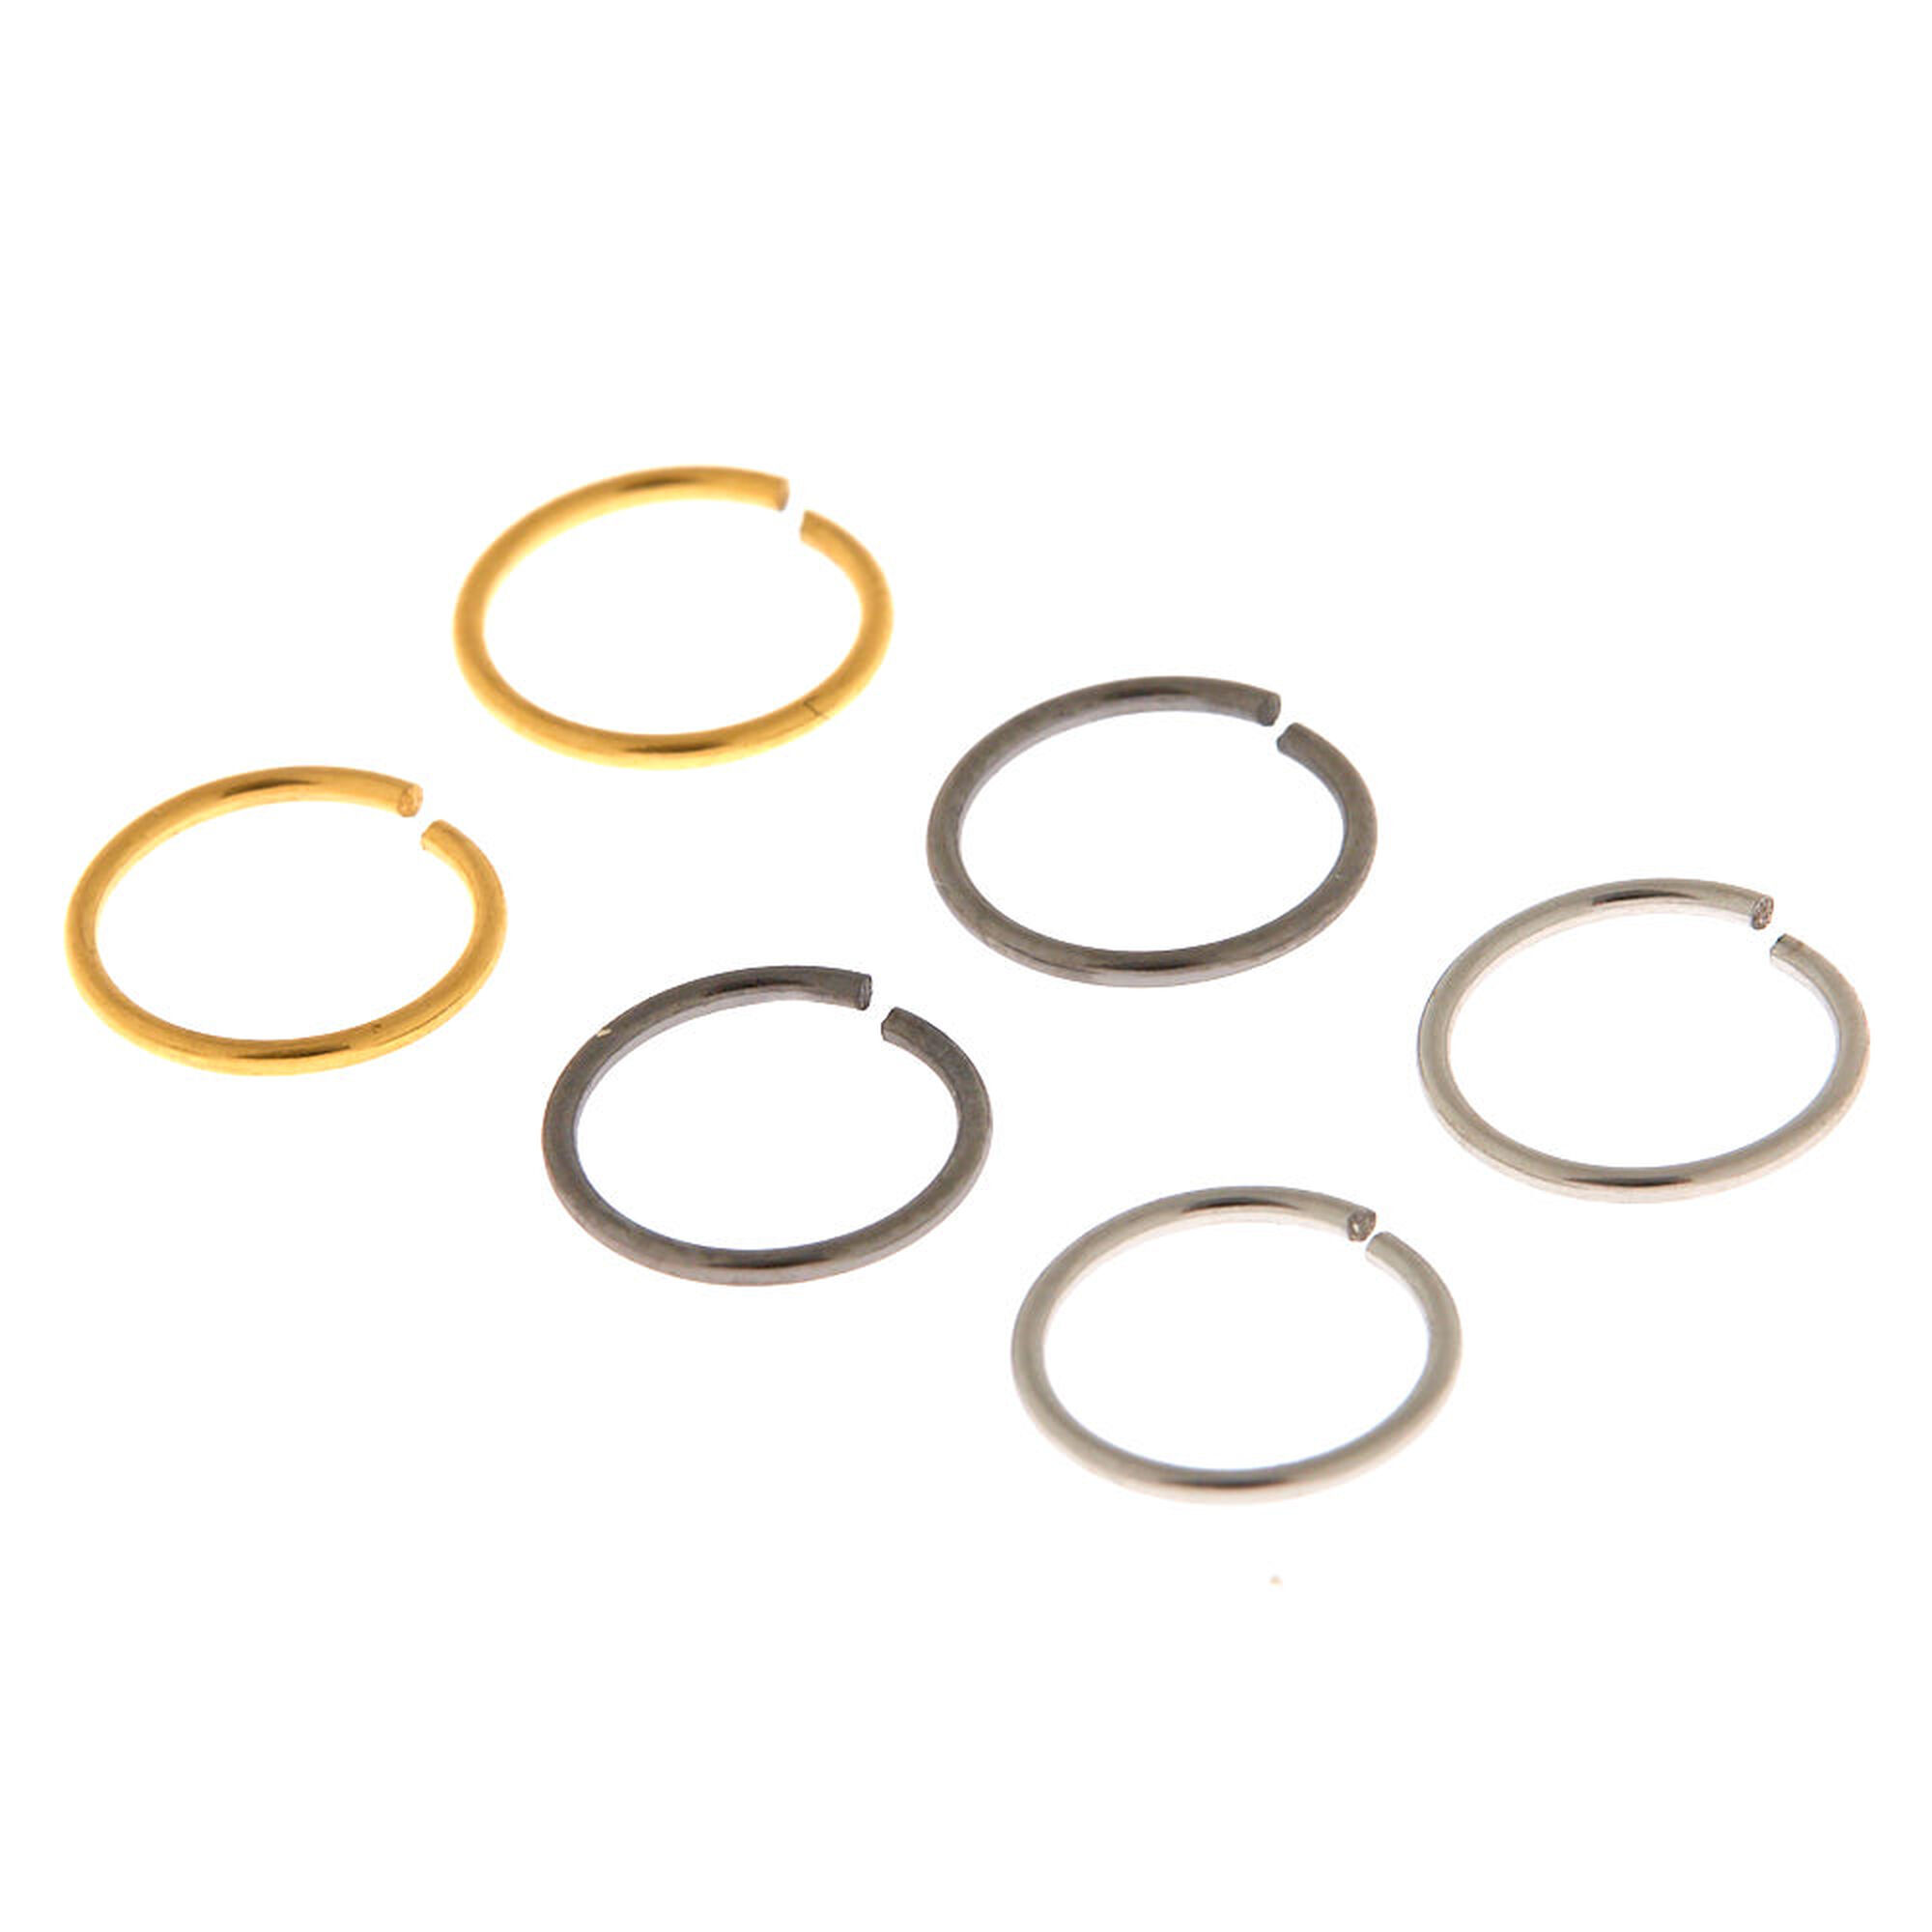 View Claires Mixed Metal 20G Solid Nose Rings 6 Pack Gold information